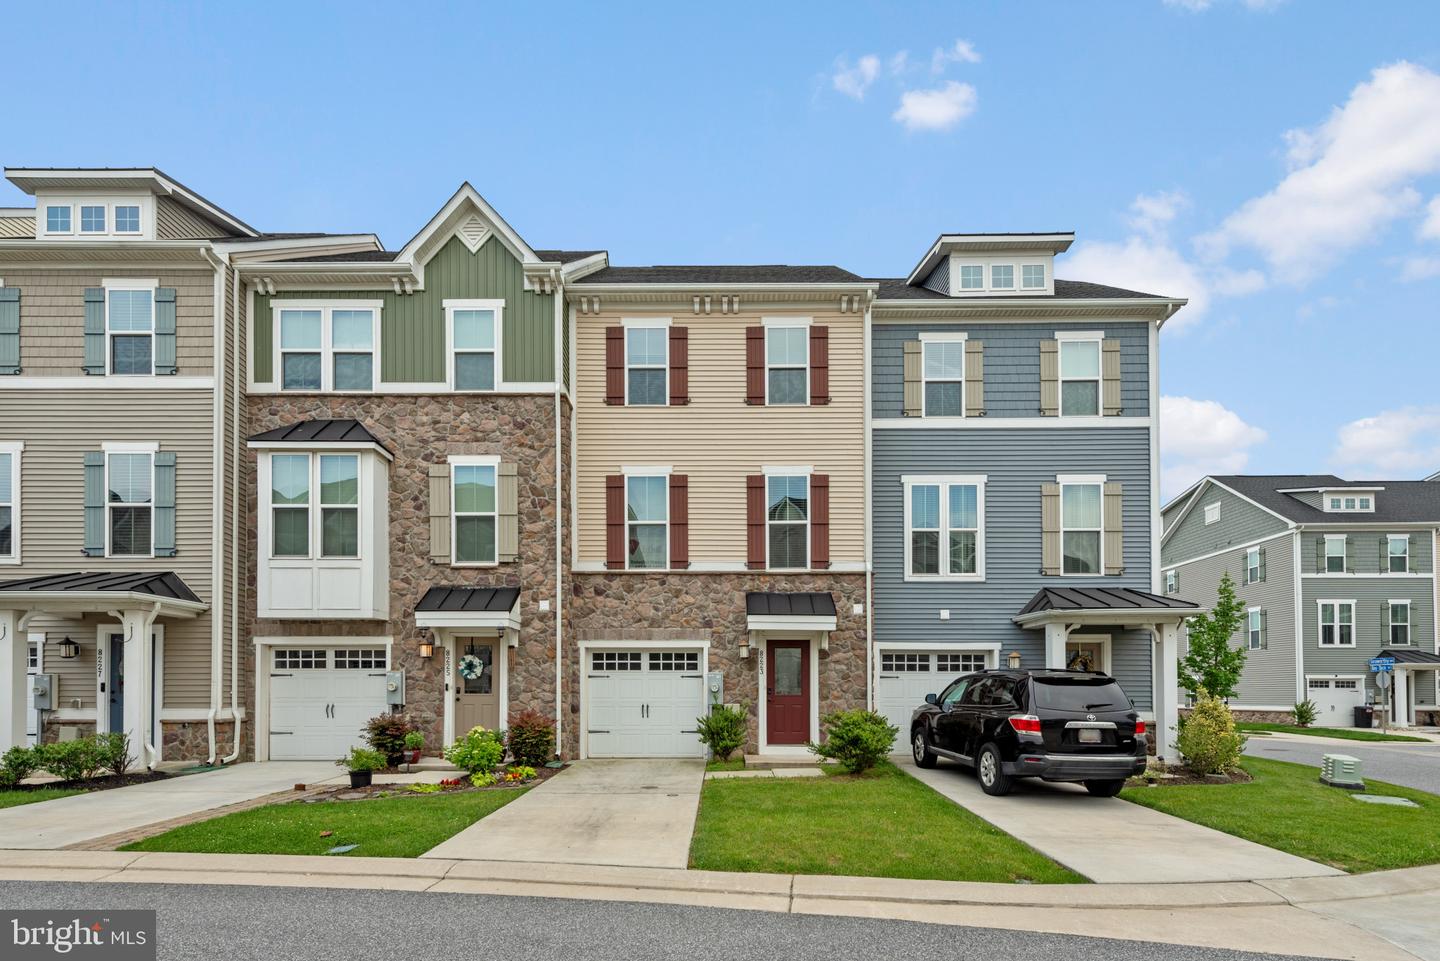 View Dundalk, MD 21222 townhome